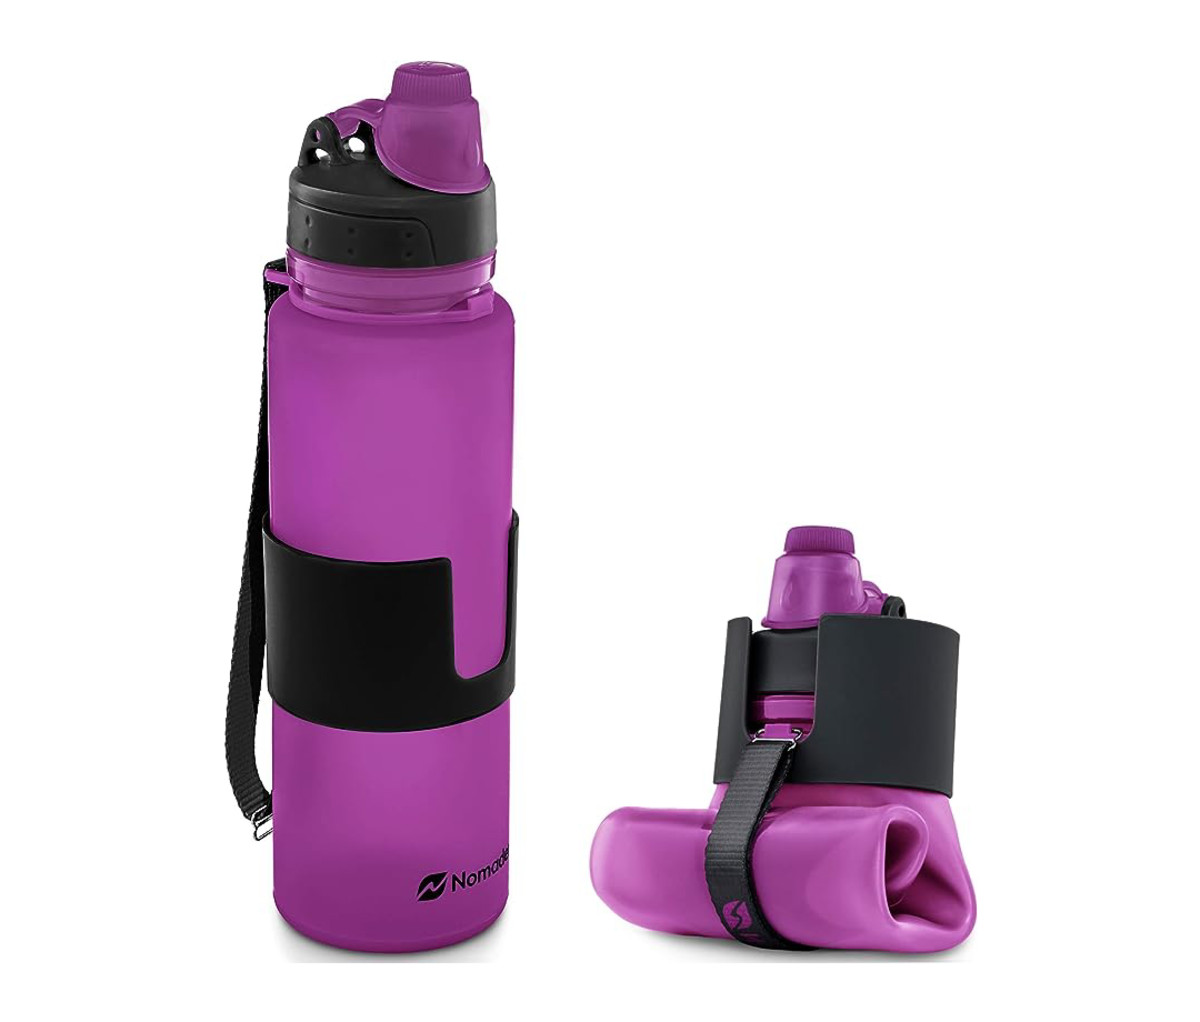 Ball-shaped Collapsible Water Bottle, Lightweight Portable